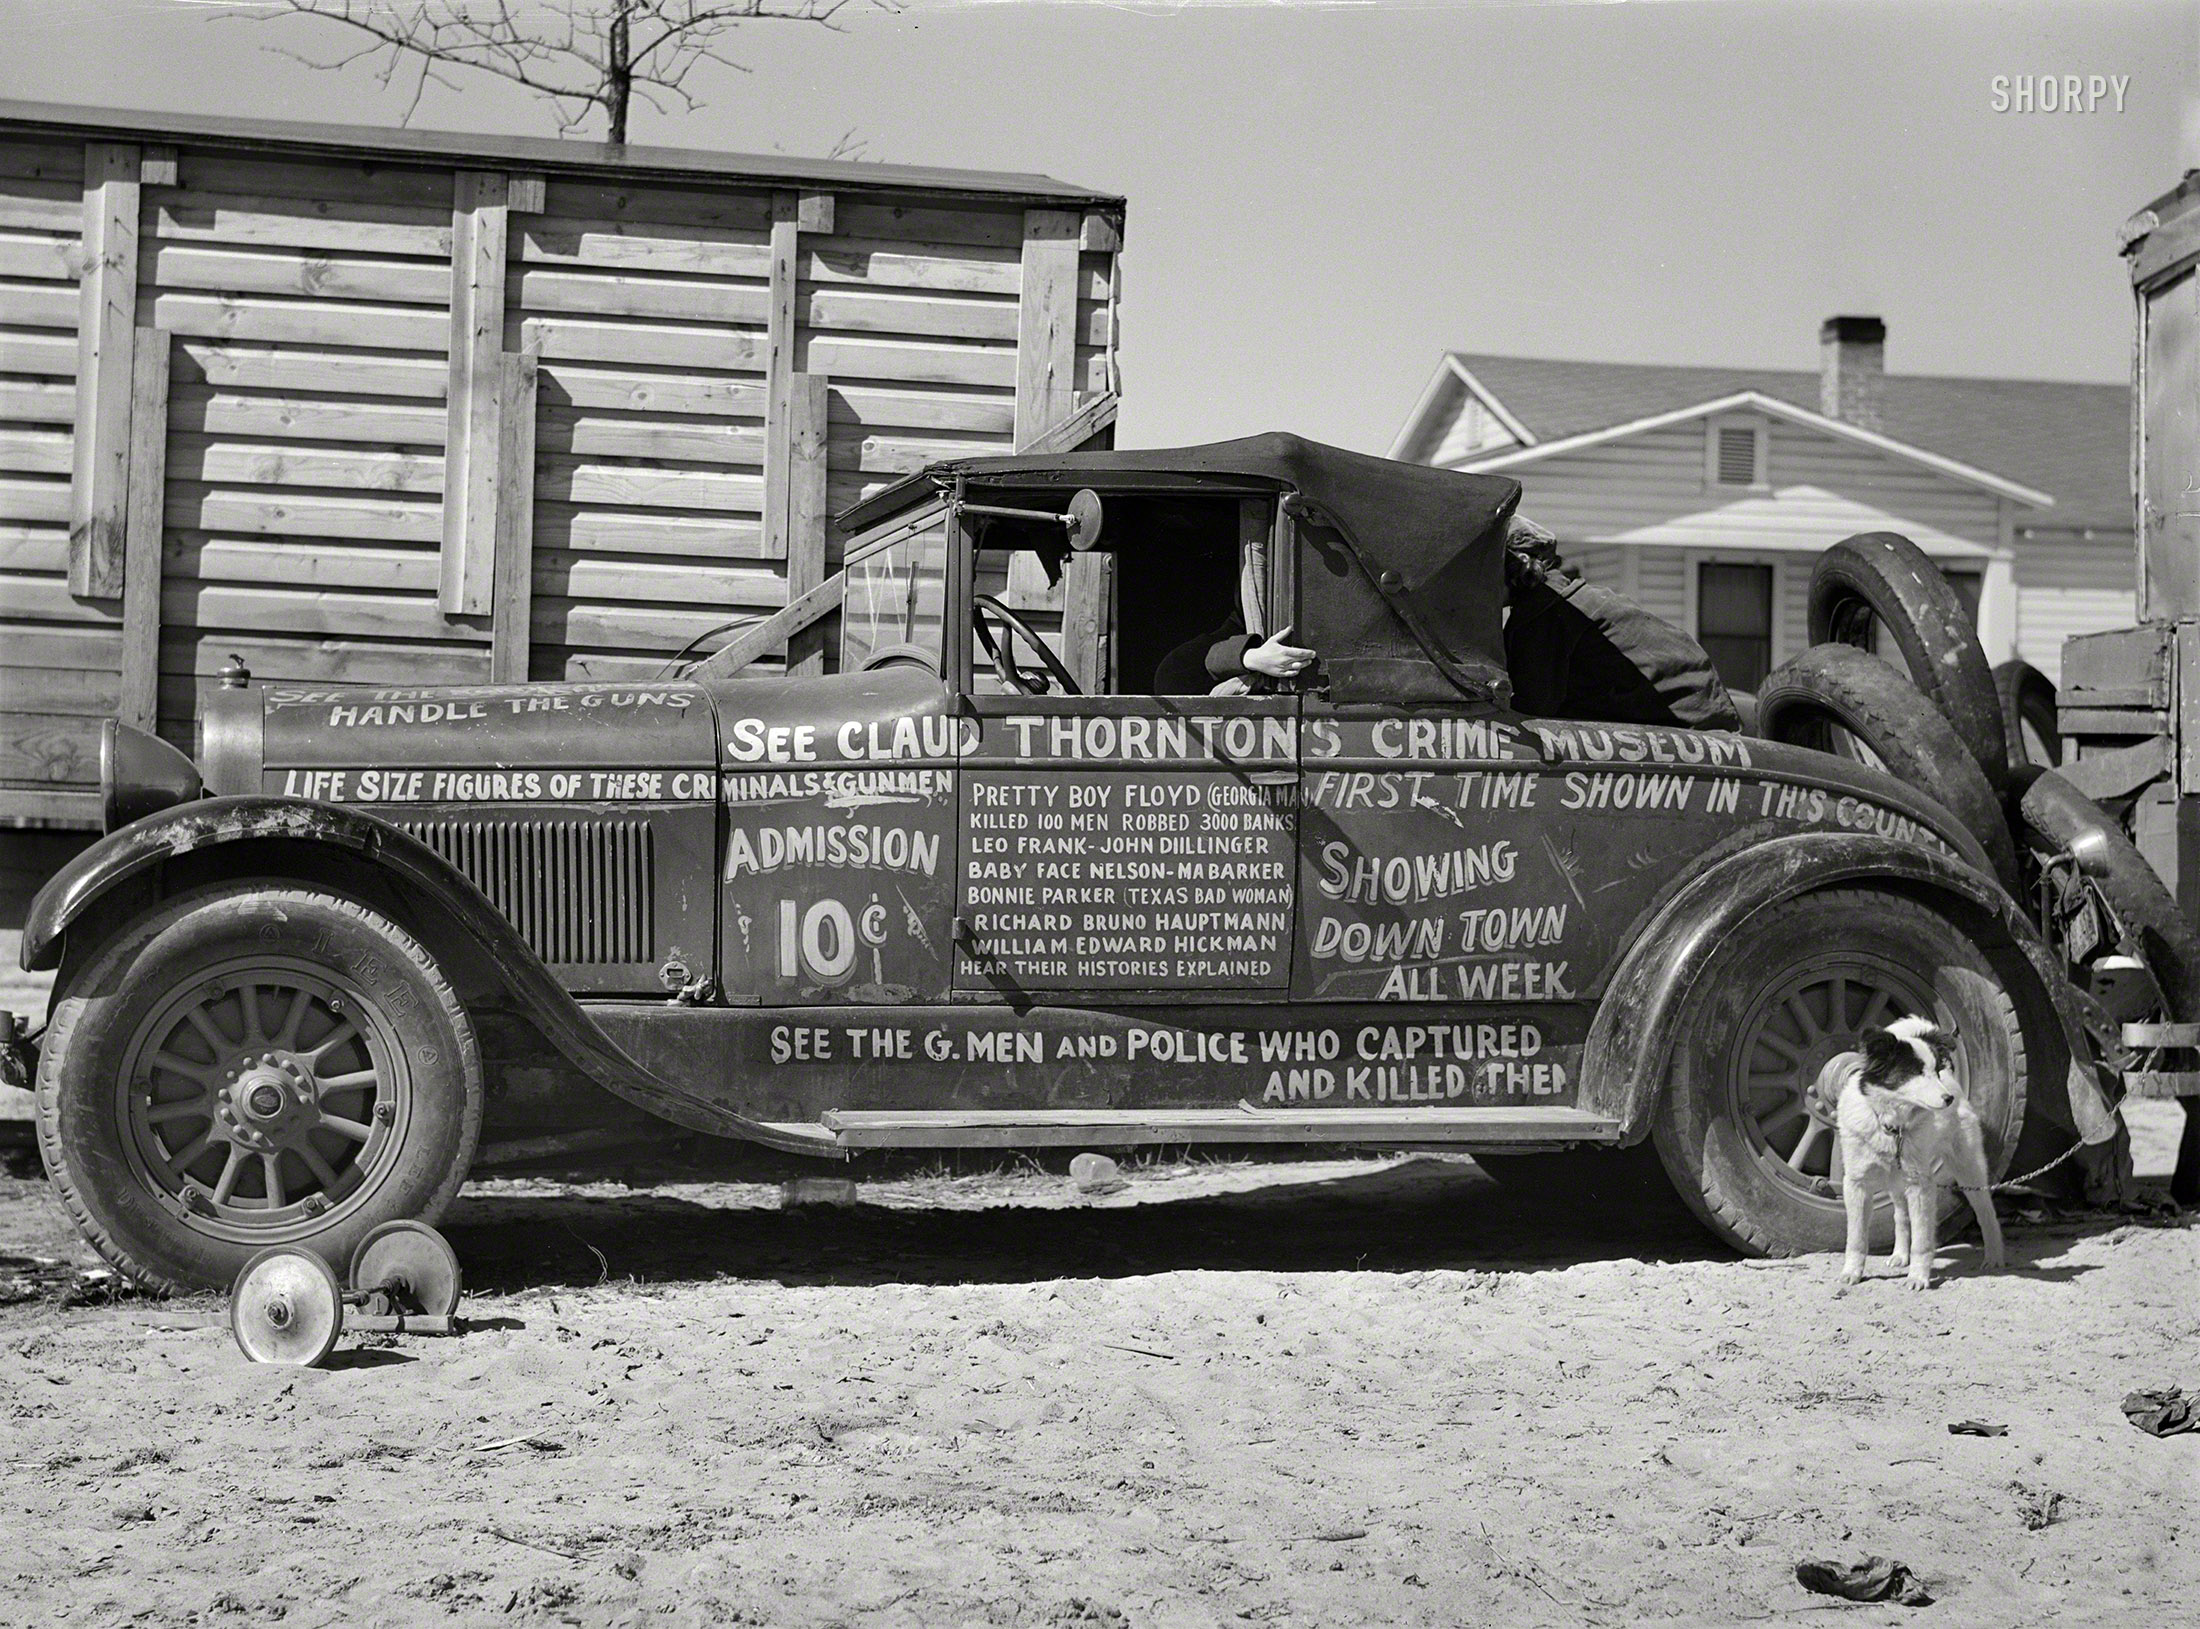 March 1941. "Car advertising 'crime museum' traveling sideshow near Fort Bragg, North Carolina." Medium format negative by Jack Delano. View full size.